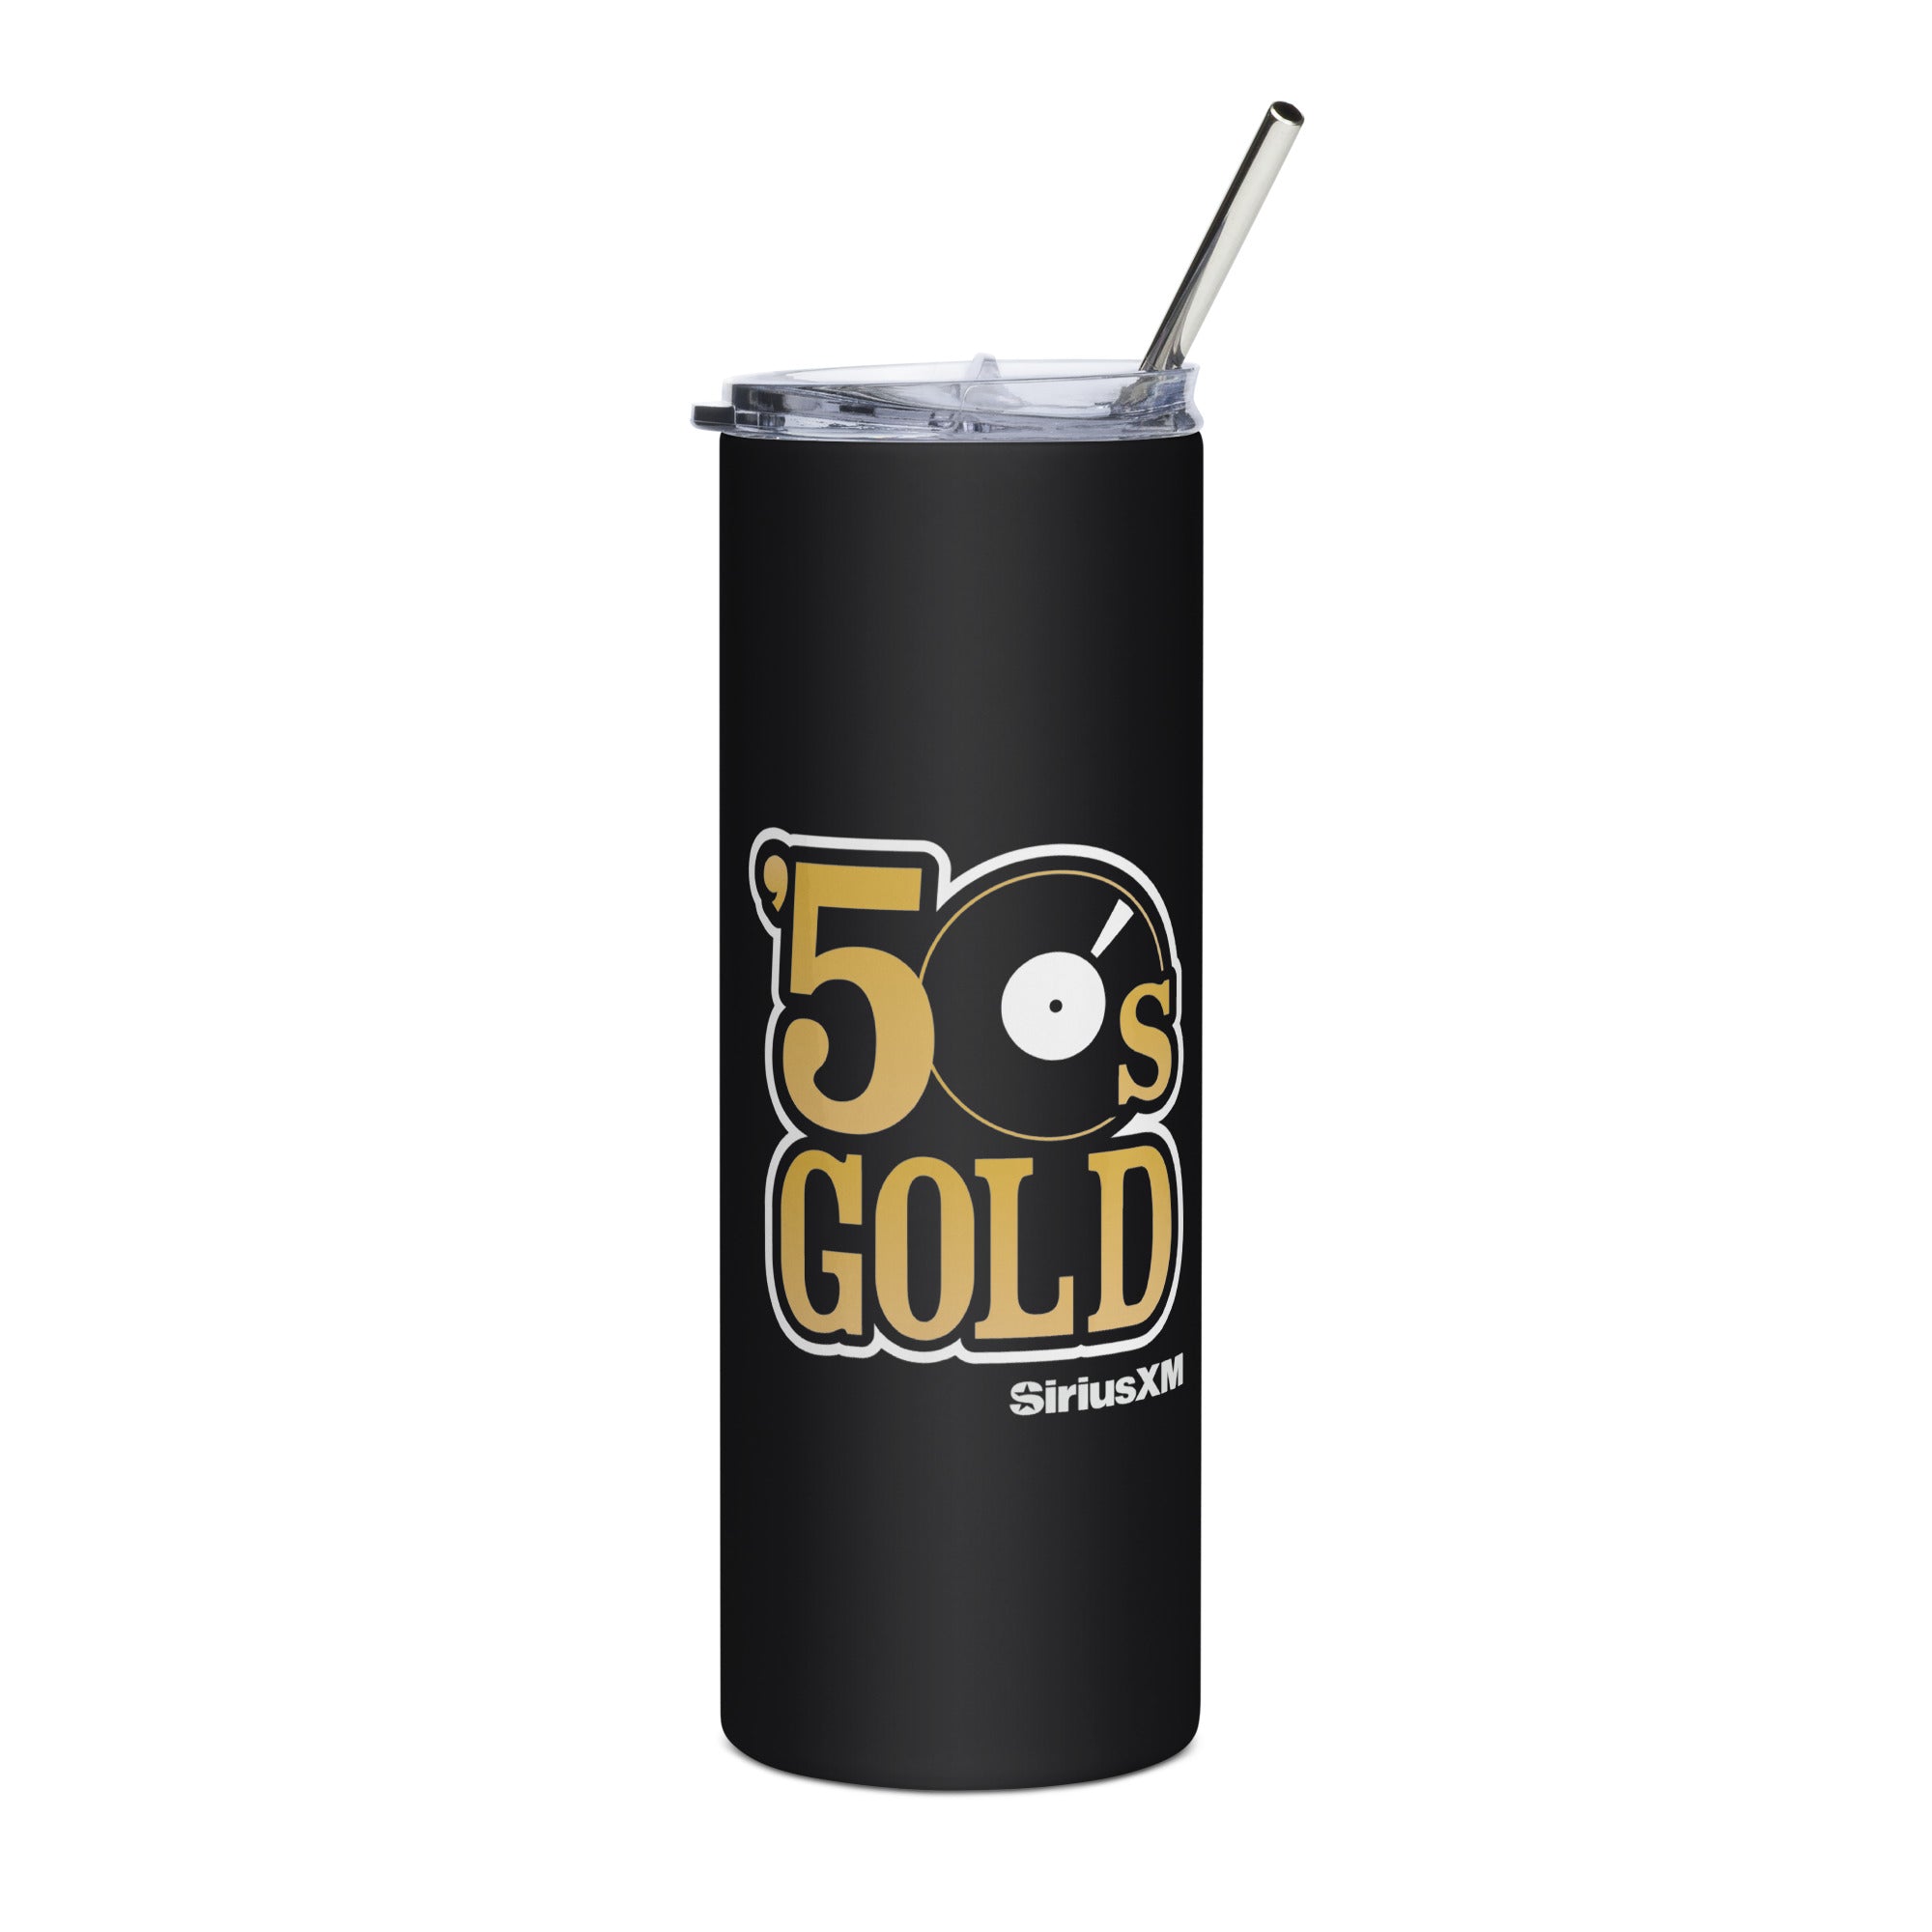 50s Gold: Stainless Tumbler